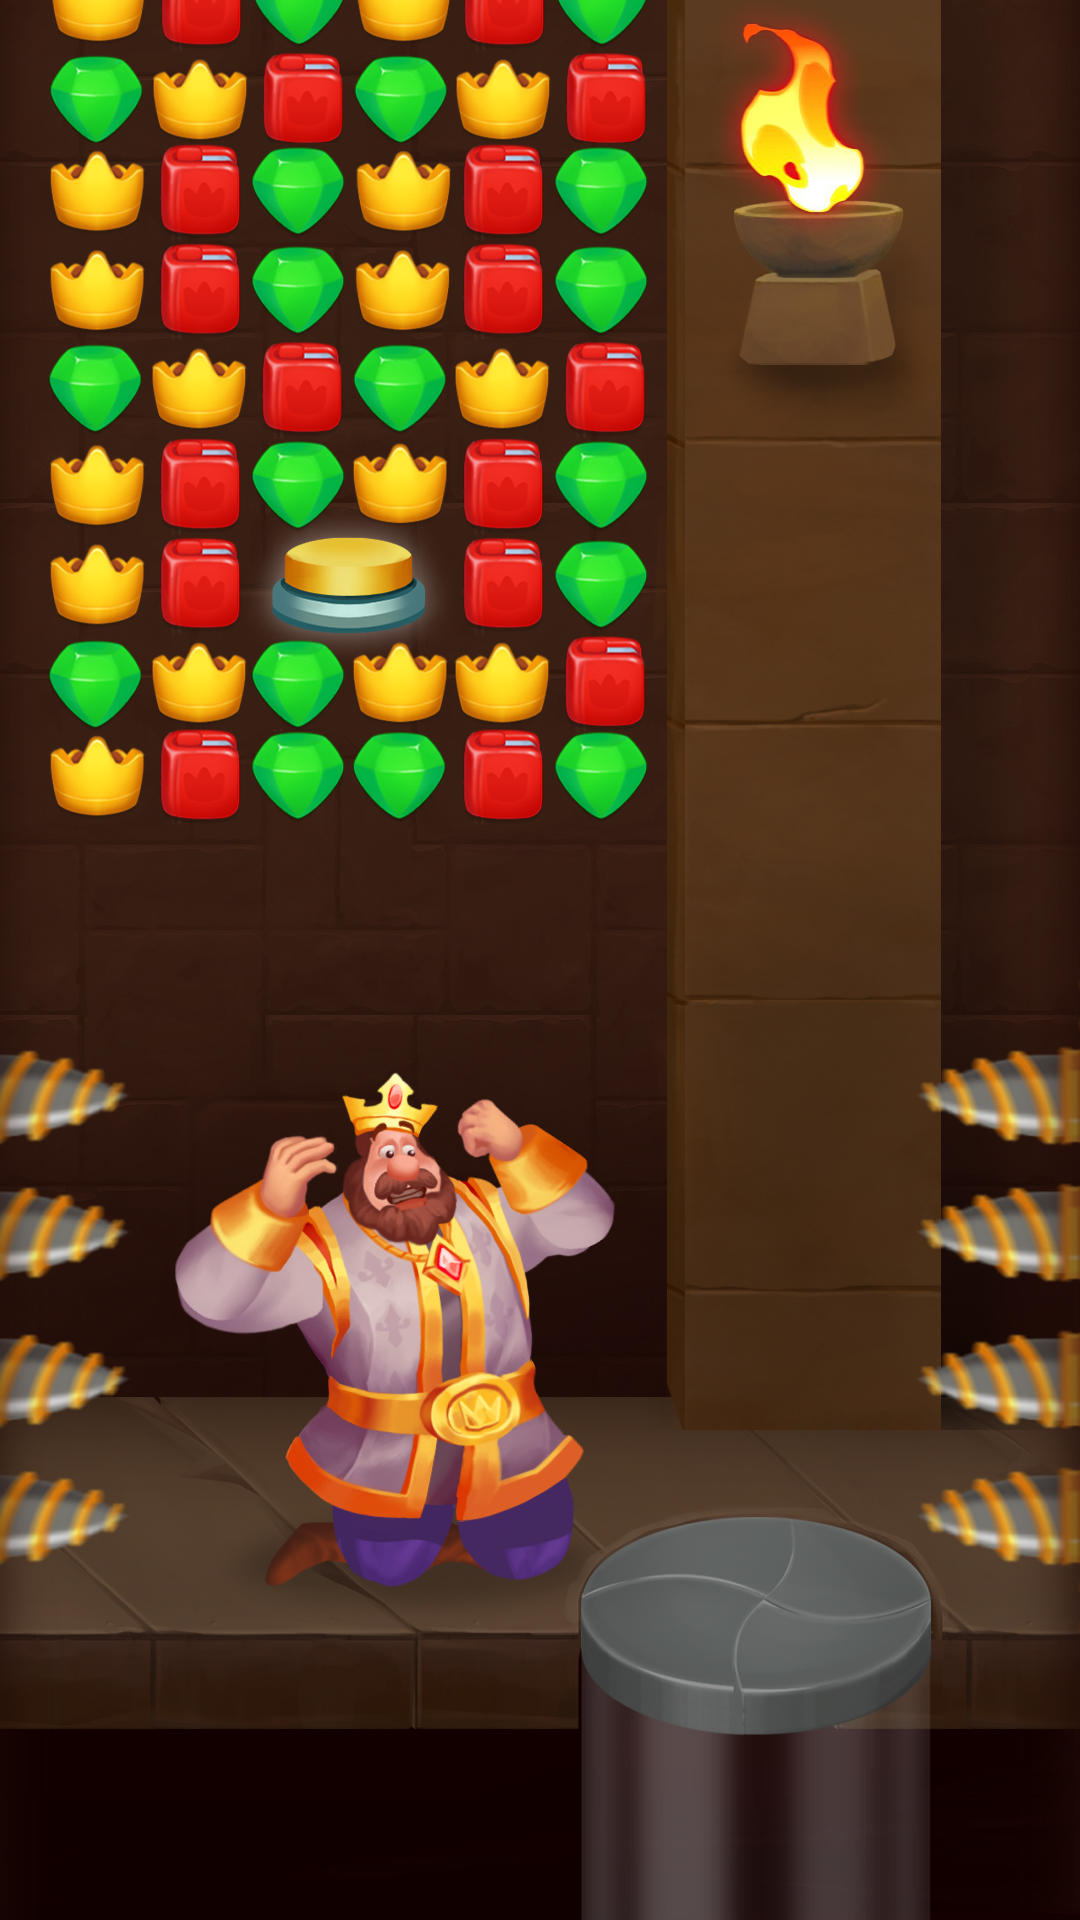 Royal Match - King's Nightmare 1 🏰 No Boosters 